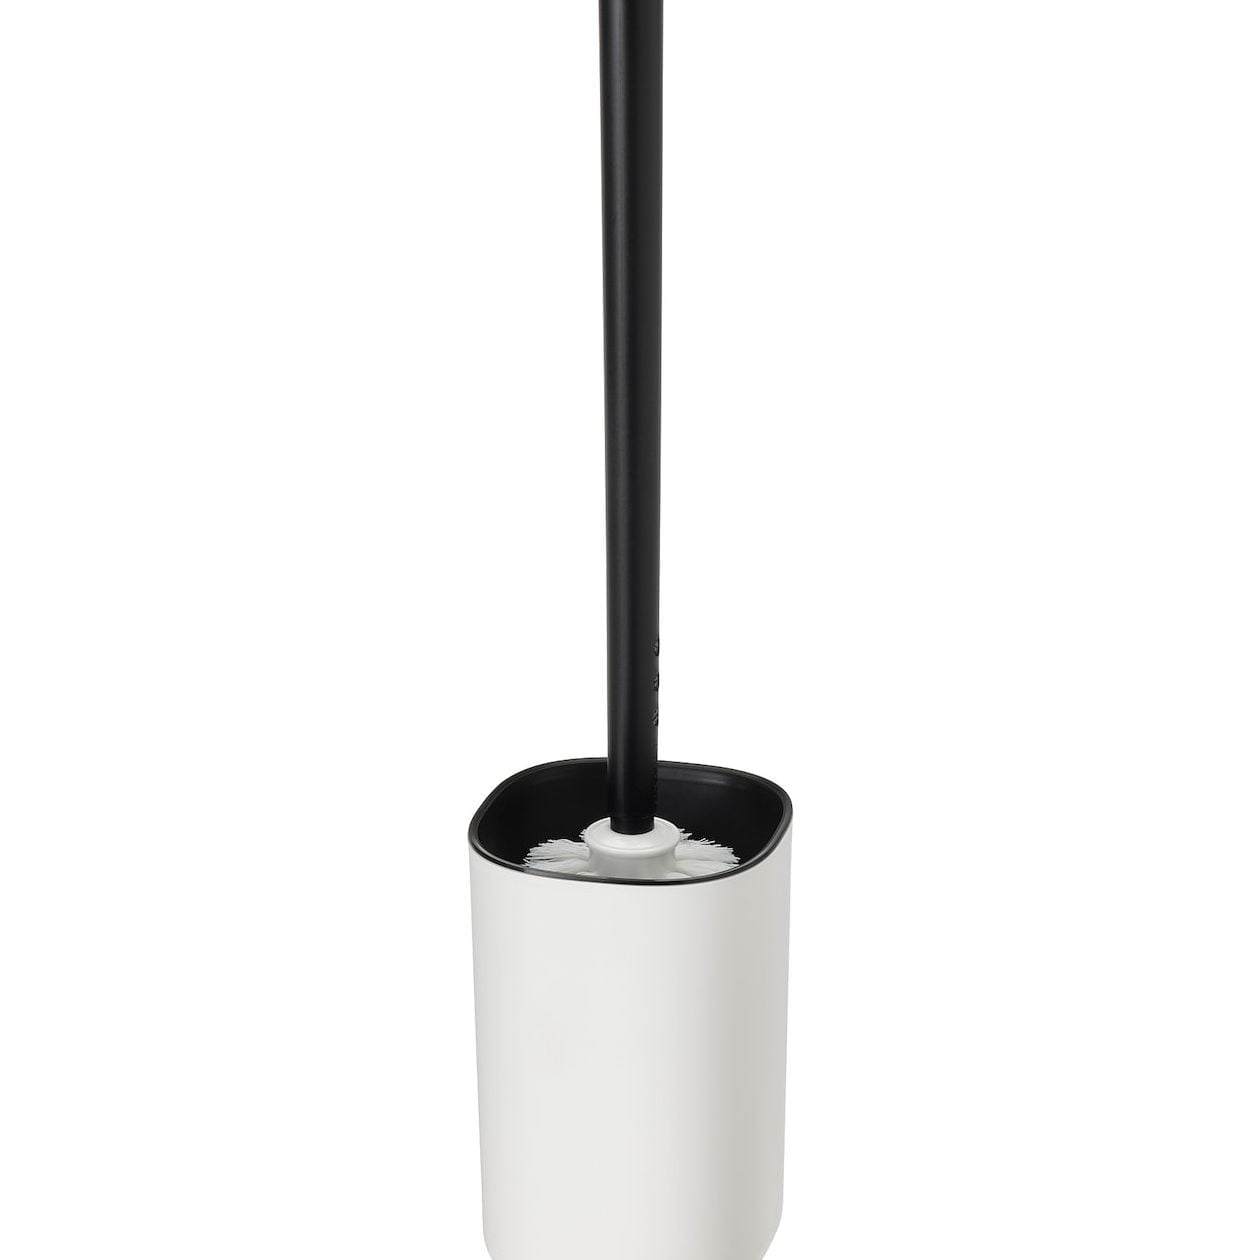 Silicone Toilet Brush: A toilet brush with a silicone head, which is often more hygienic and easier to clean than traditional bristled brushes